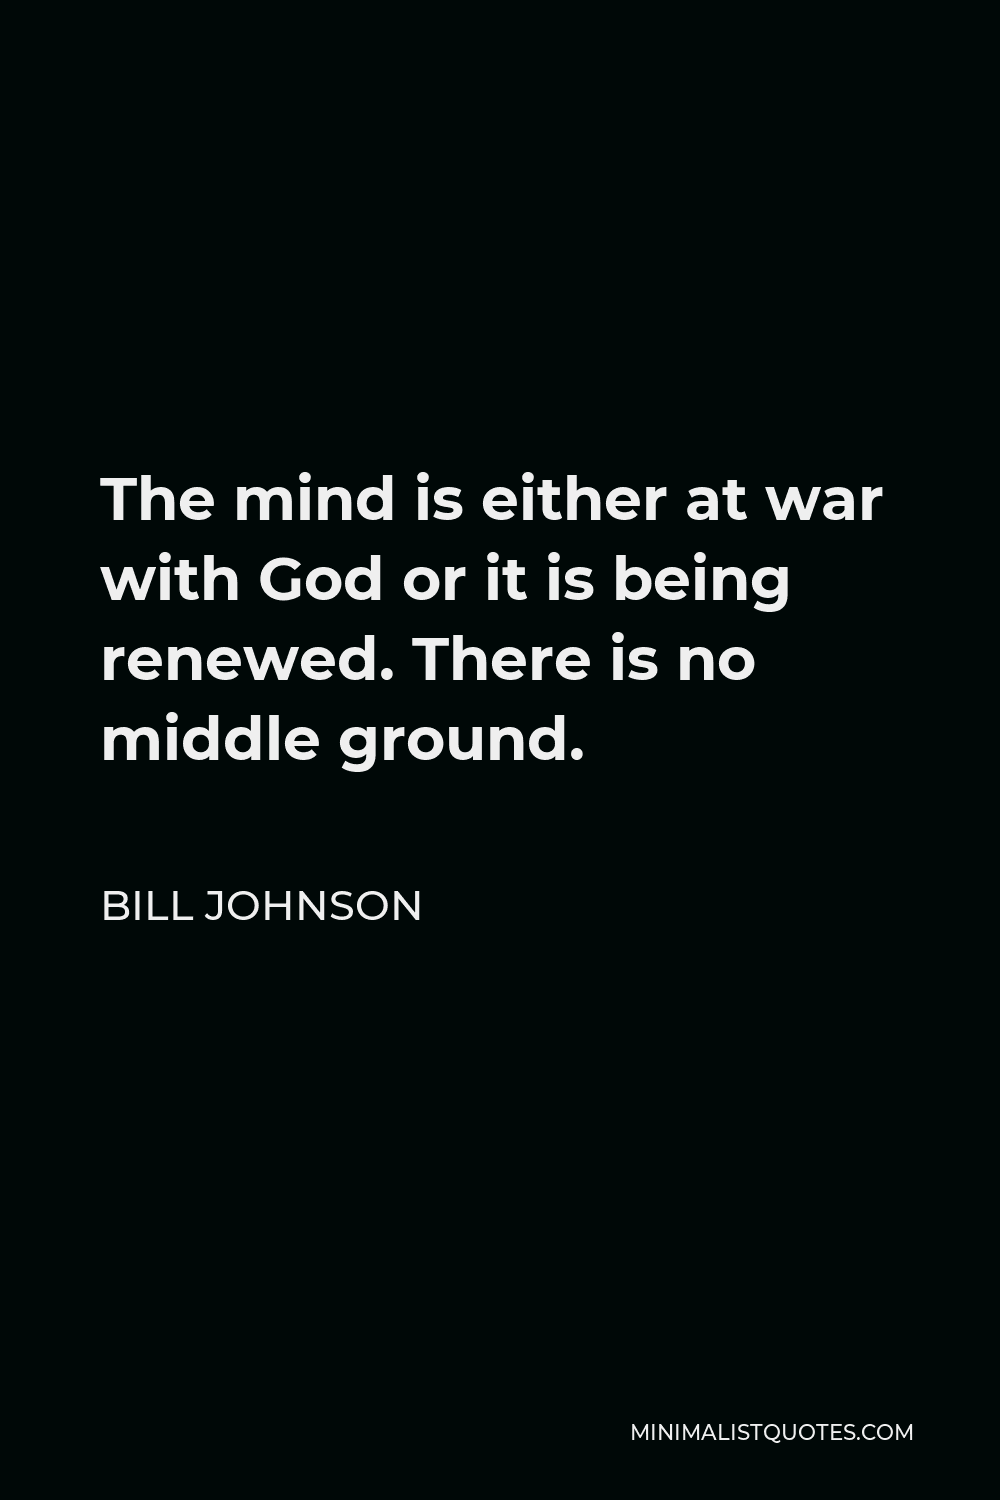 Bill Johnson Quote - The mind is either at war with God or it is being renewed. There is no middle ground.